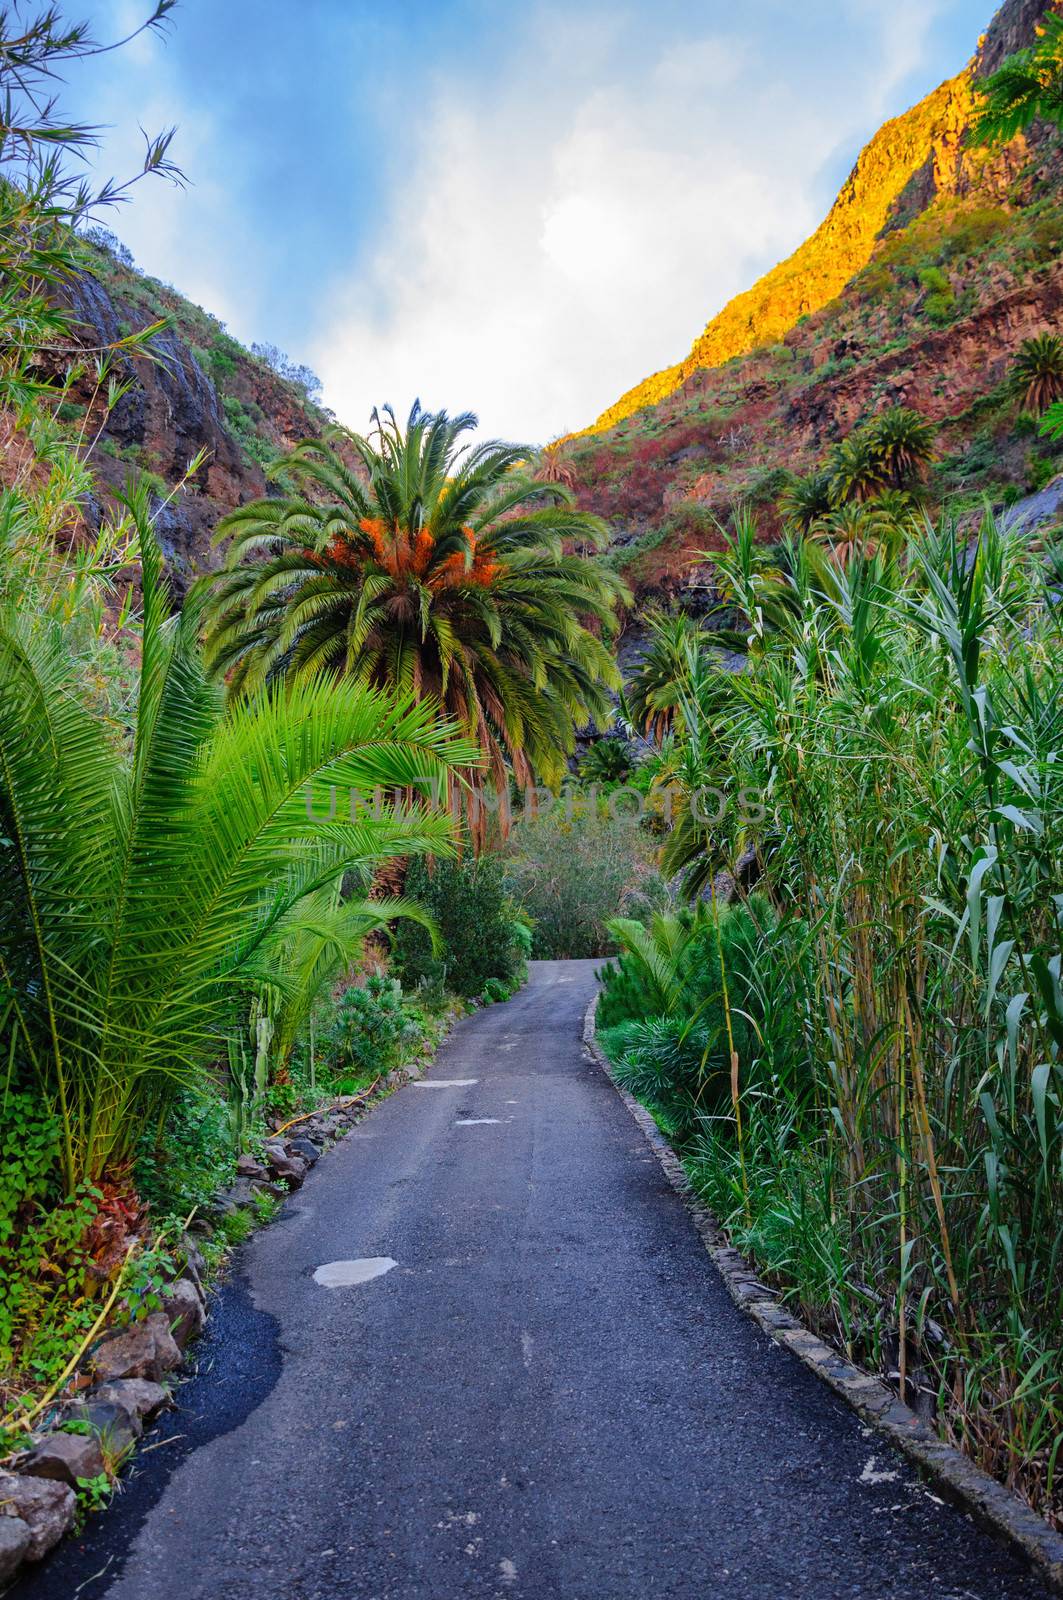 Palms with a road near Masca village with mountains, Tenerife, Canarian Islands